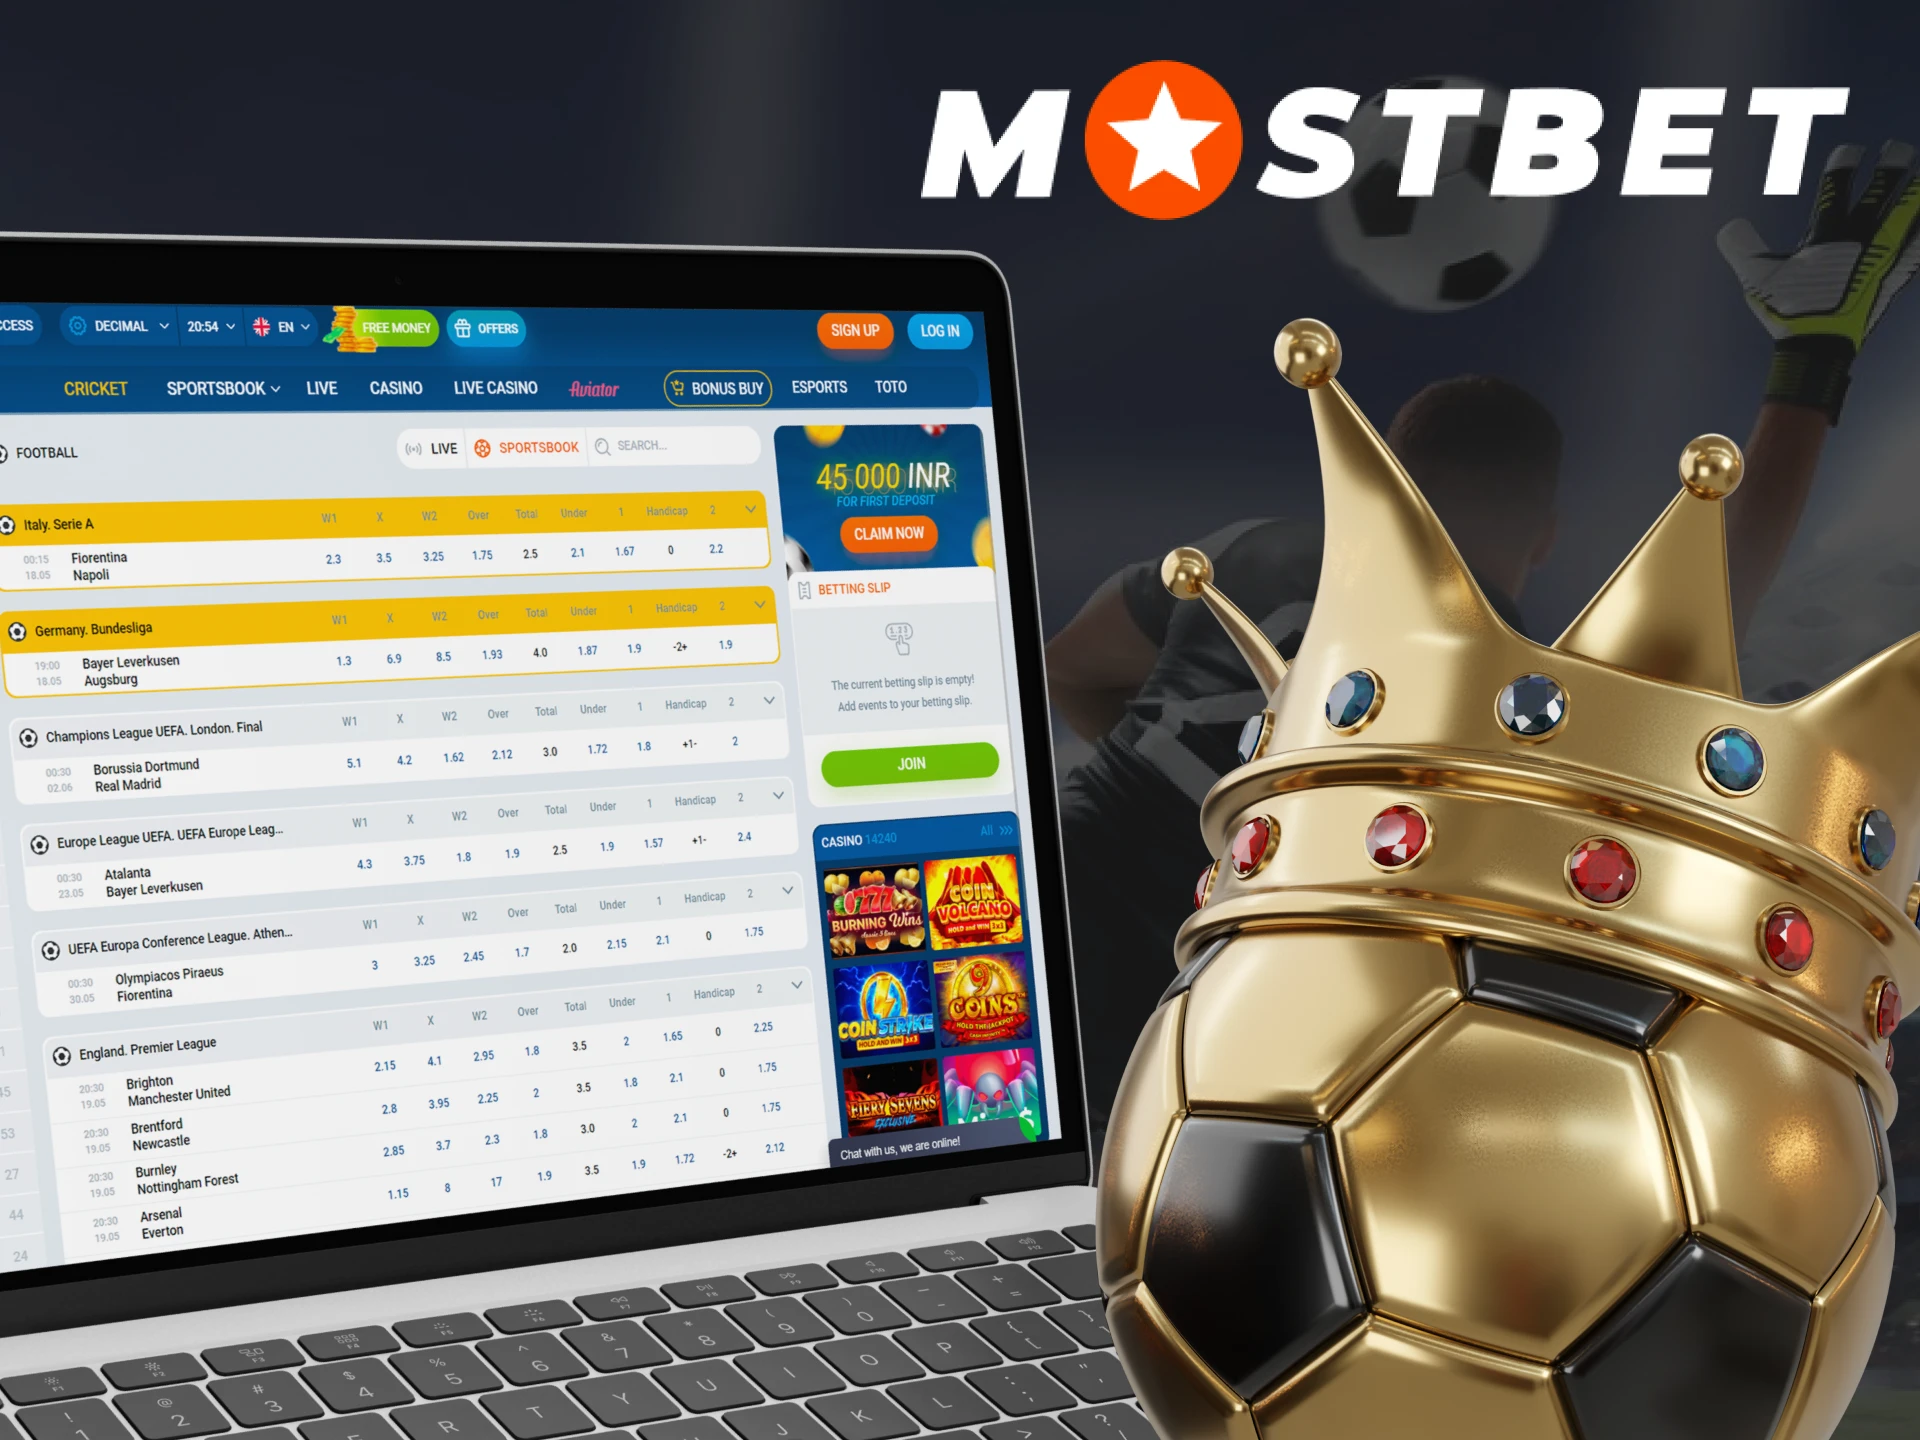 Football is one of the most popular sports disciplines that you can bet on at Mostbet.